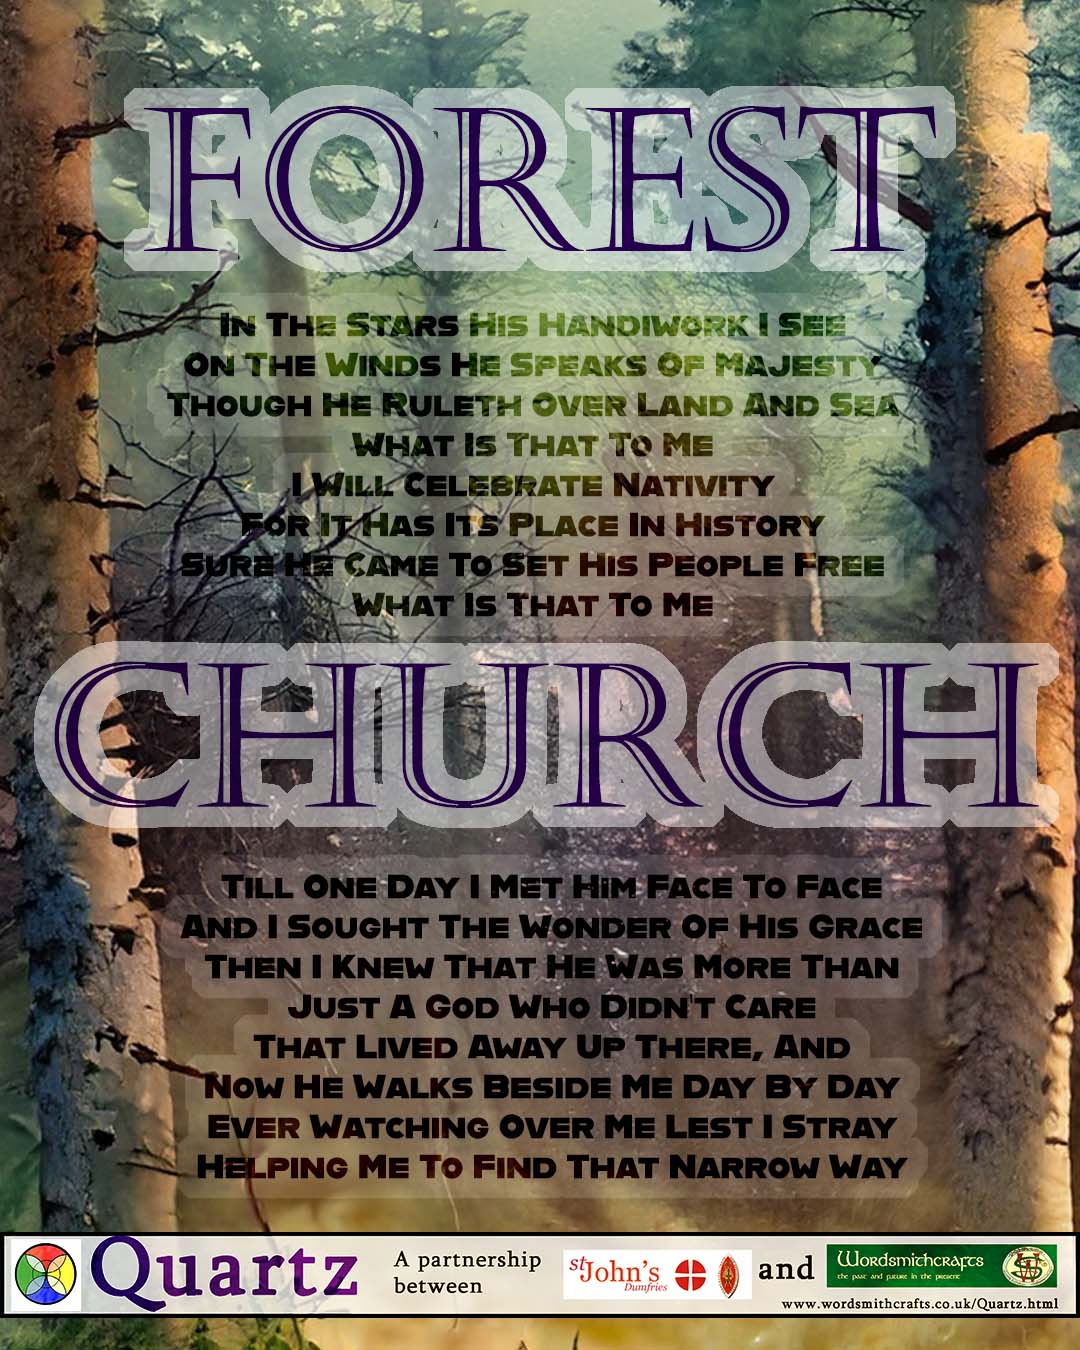 Quartz Forest Church, 3rd Sunday in the Month, 2pm outside the Crichton chapel in Dumfries.